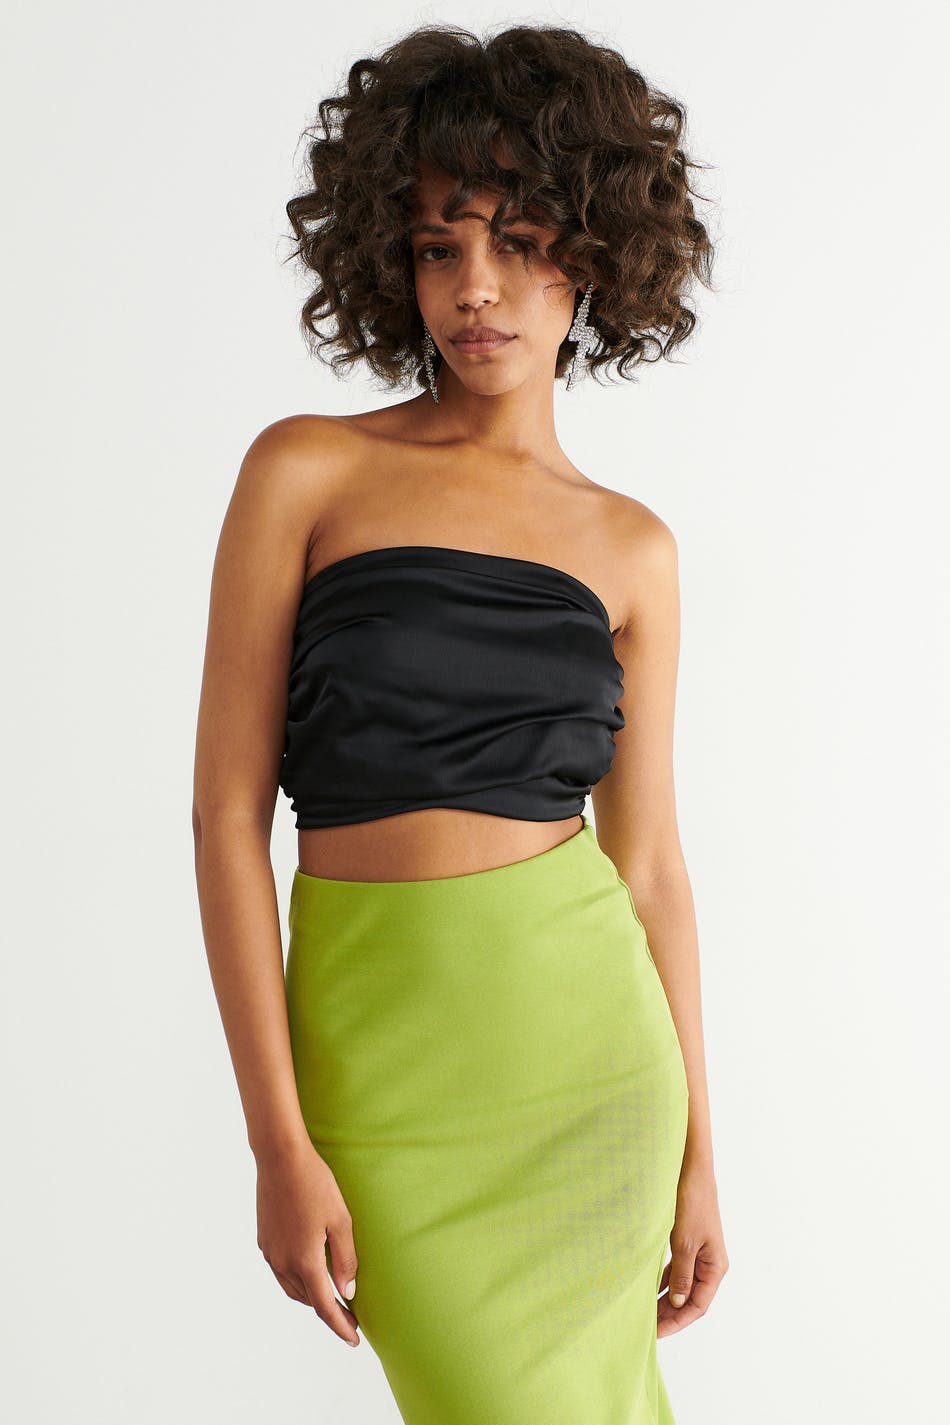 Dom Necessities Velkendt Pleated satin tube top - Gina Tricot